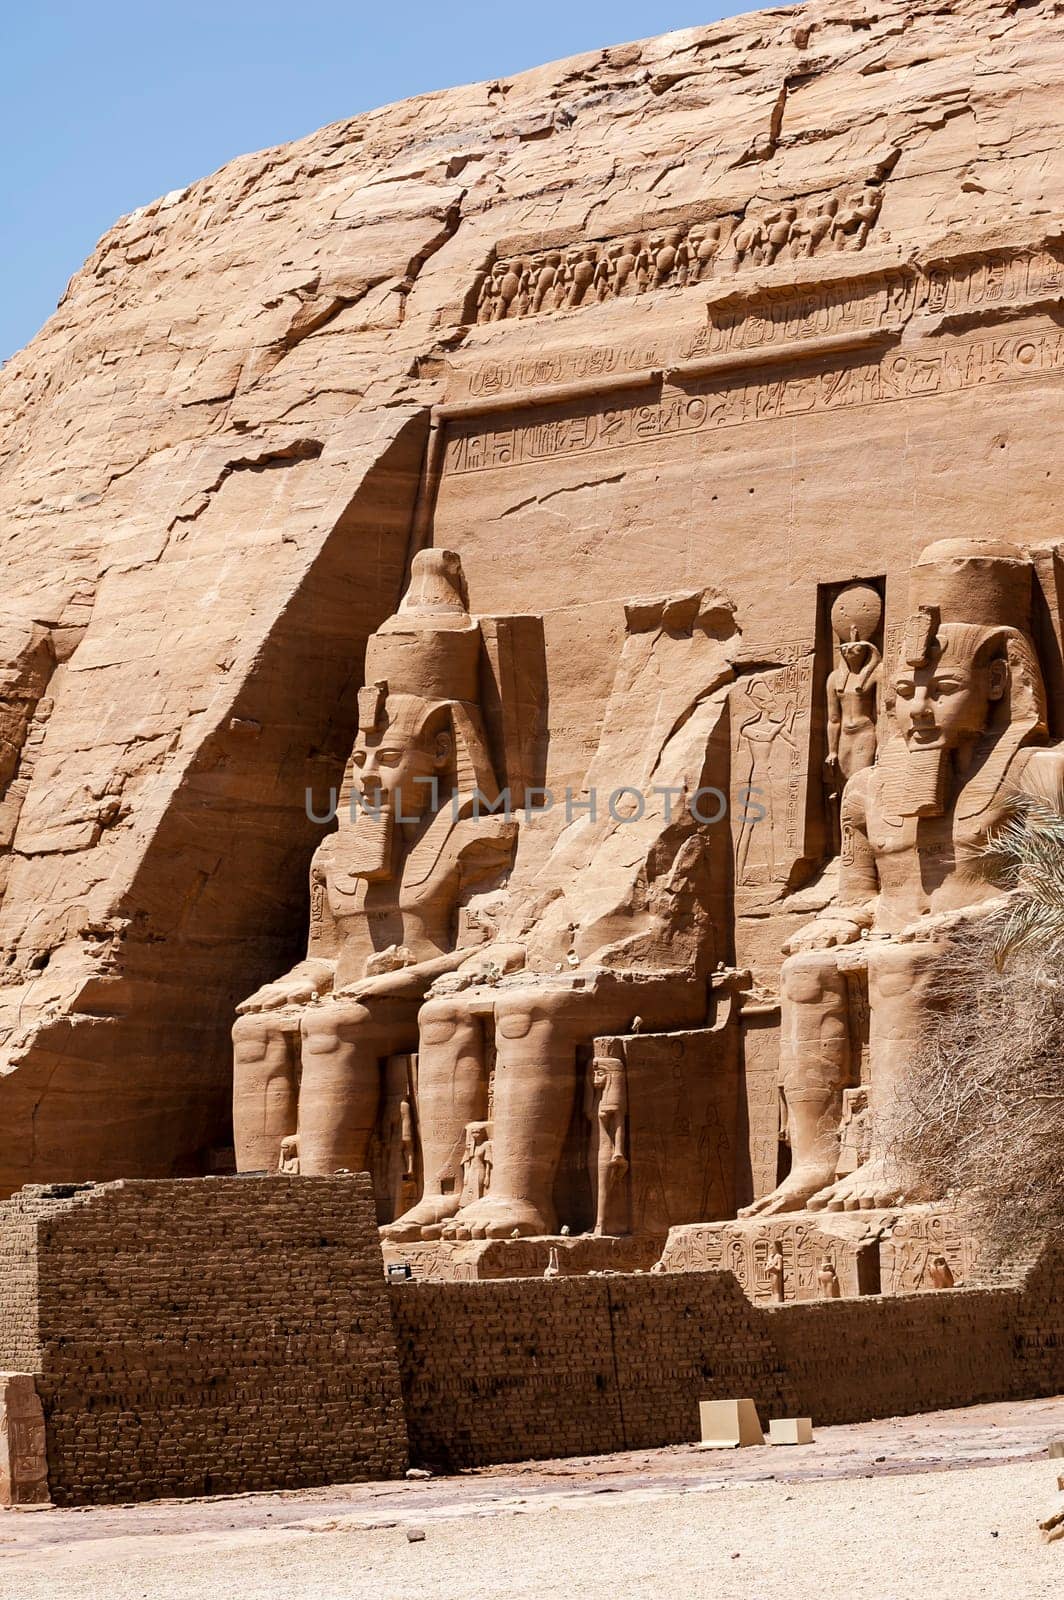 The colossuses of Abu Simbel by Giamplume